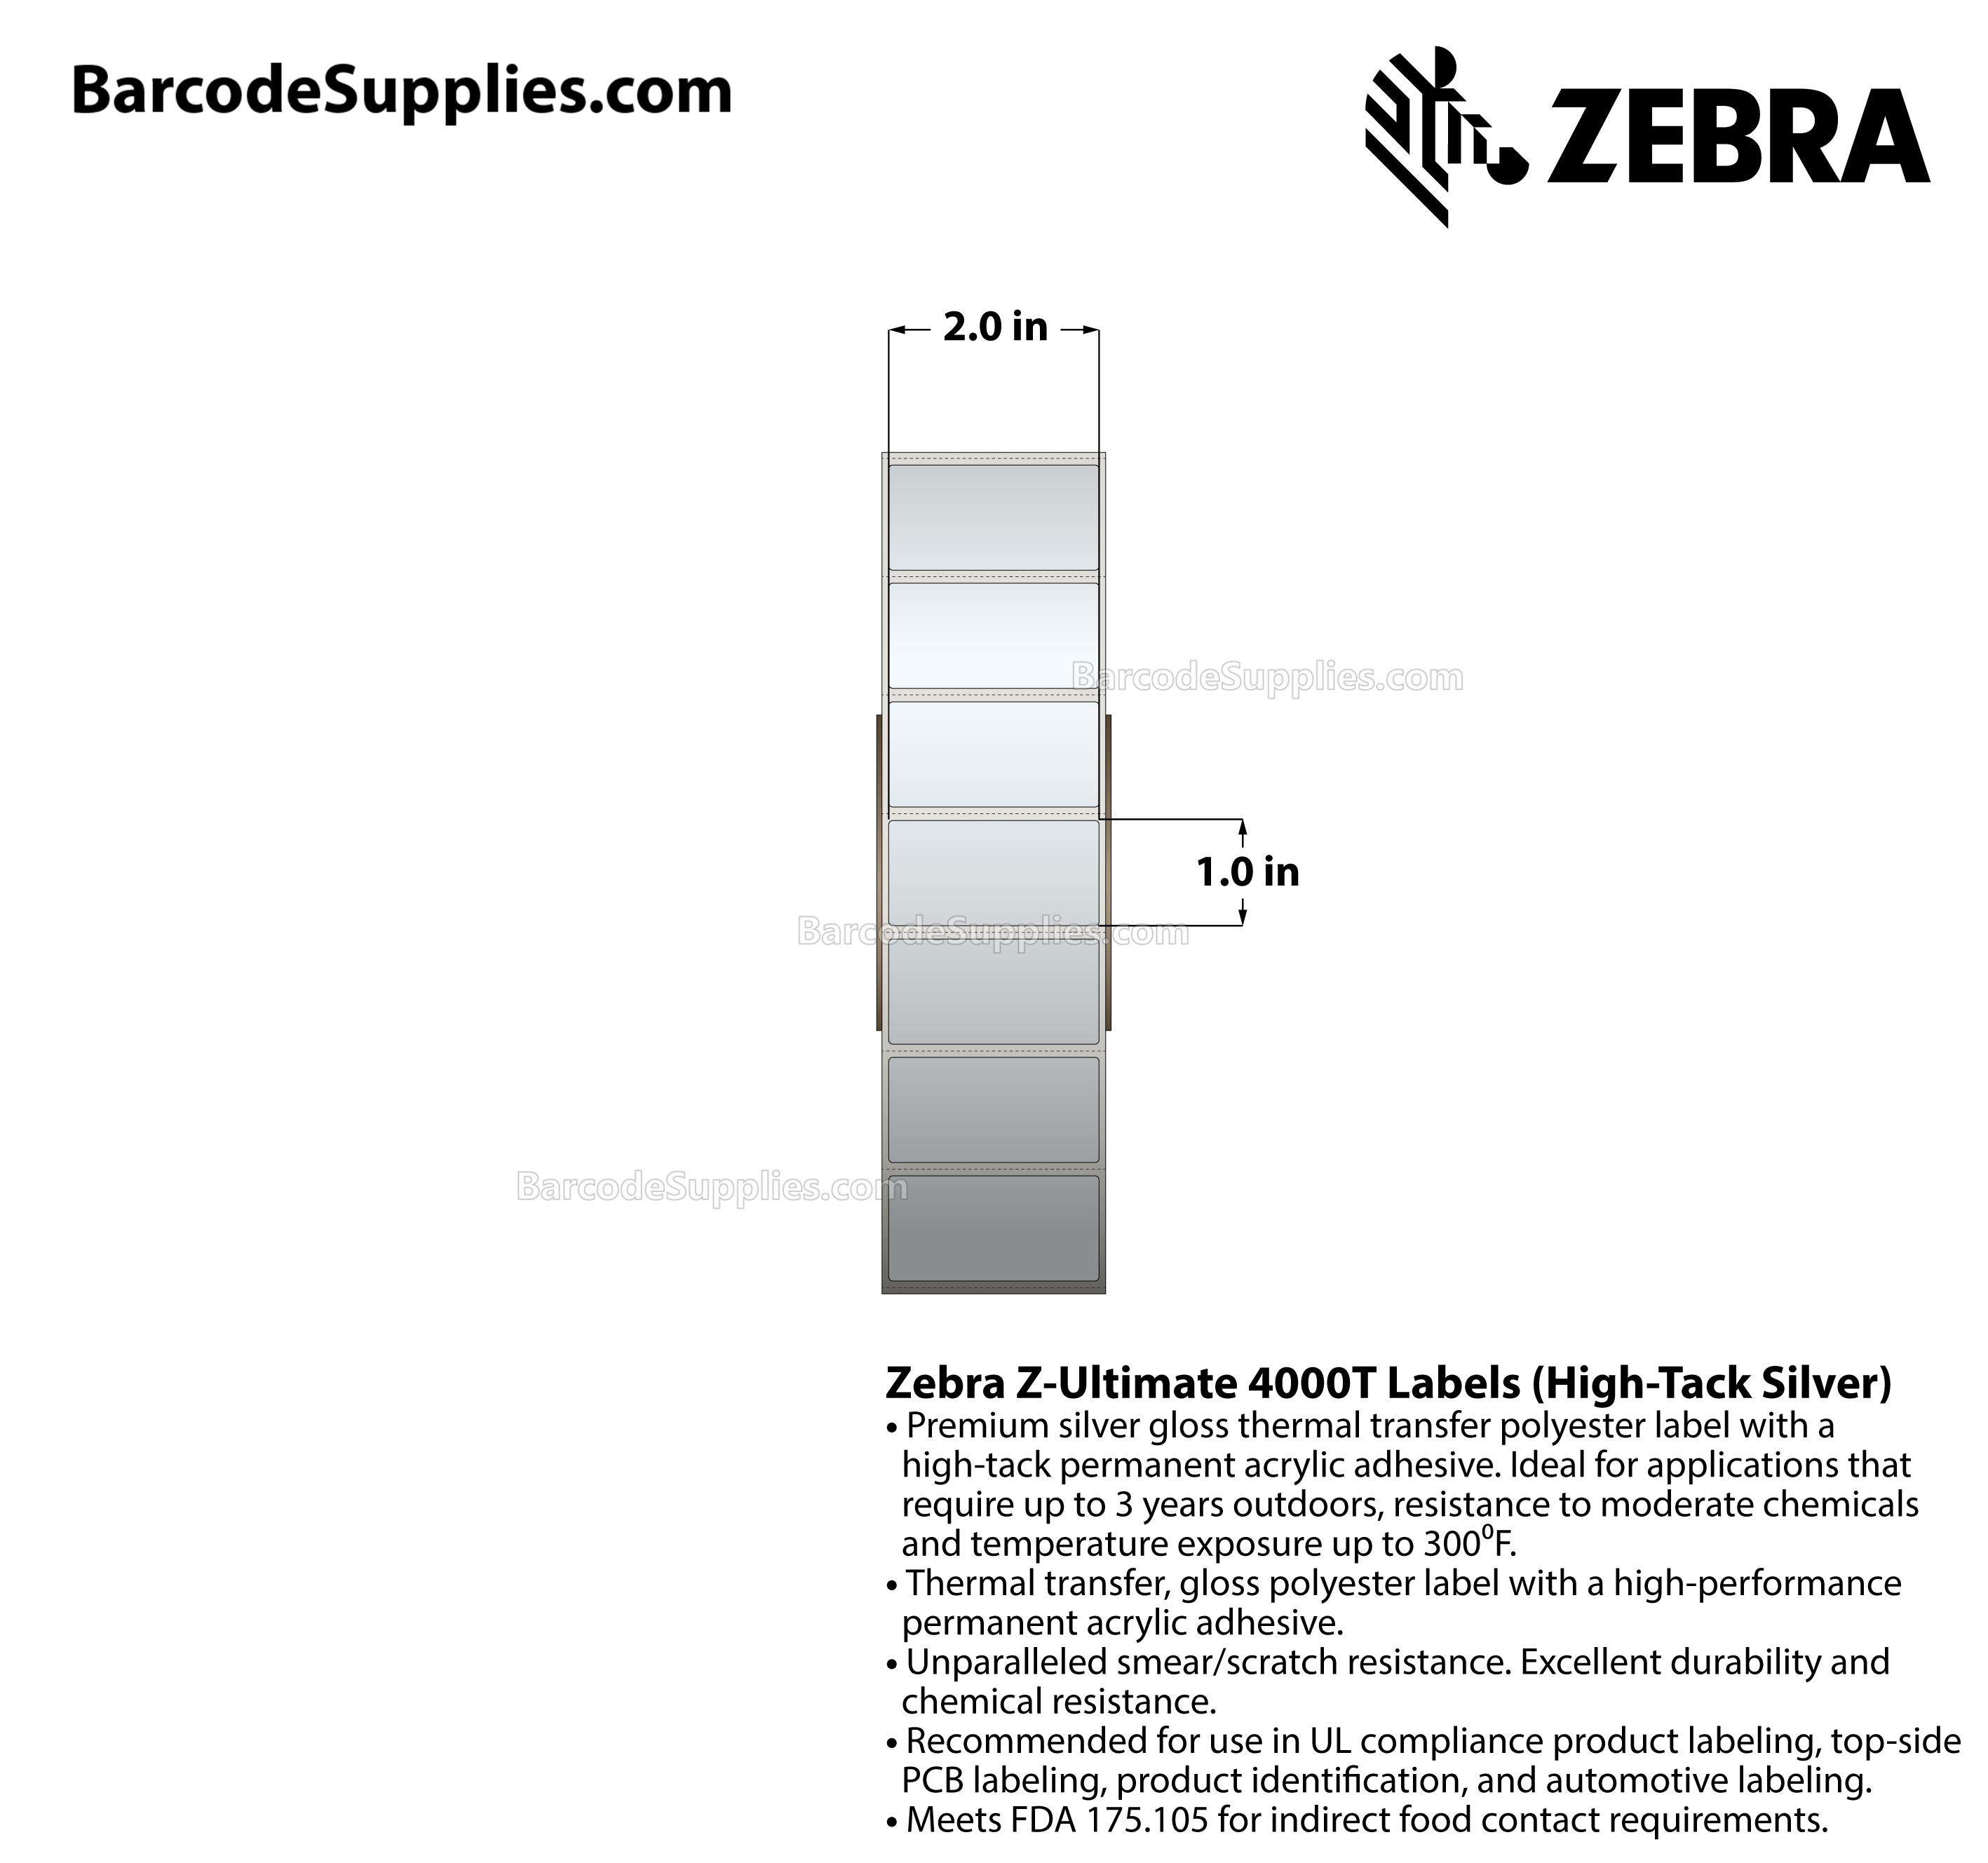 2 x 1 Thermal Transfer Silver Z-Ultimate 4000T High-Tack Silver Labels With High-tack Adhesive - Perforated - 3000 Labels Per Roll - Carton Of 1 Rolls - 3000 Labels Total - MPN: 10023352